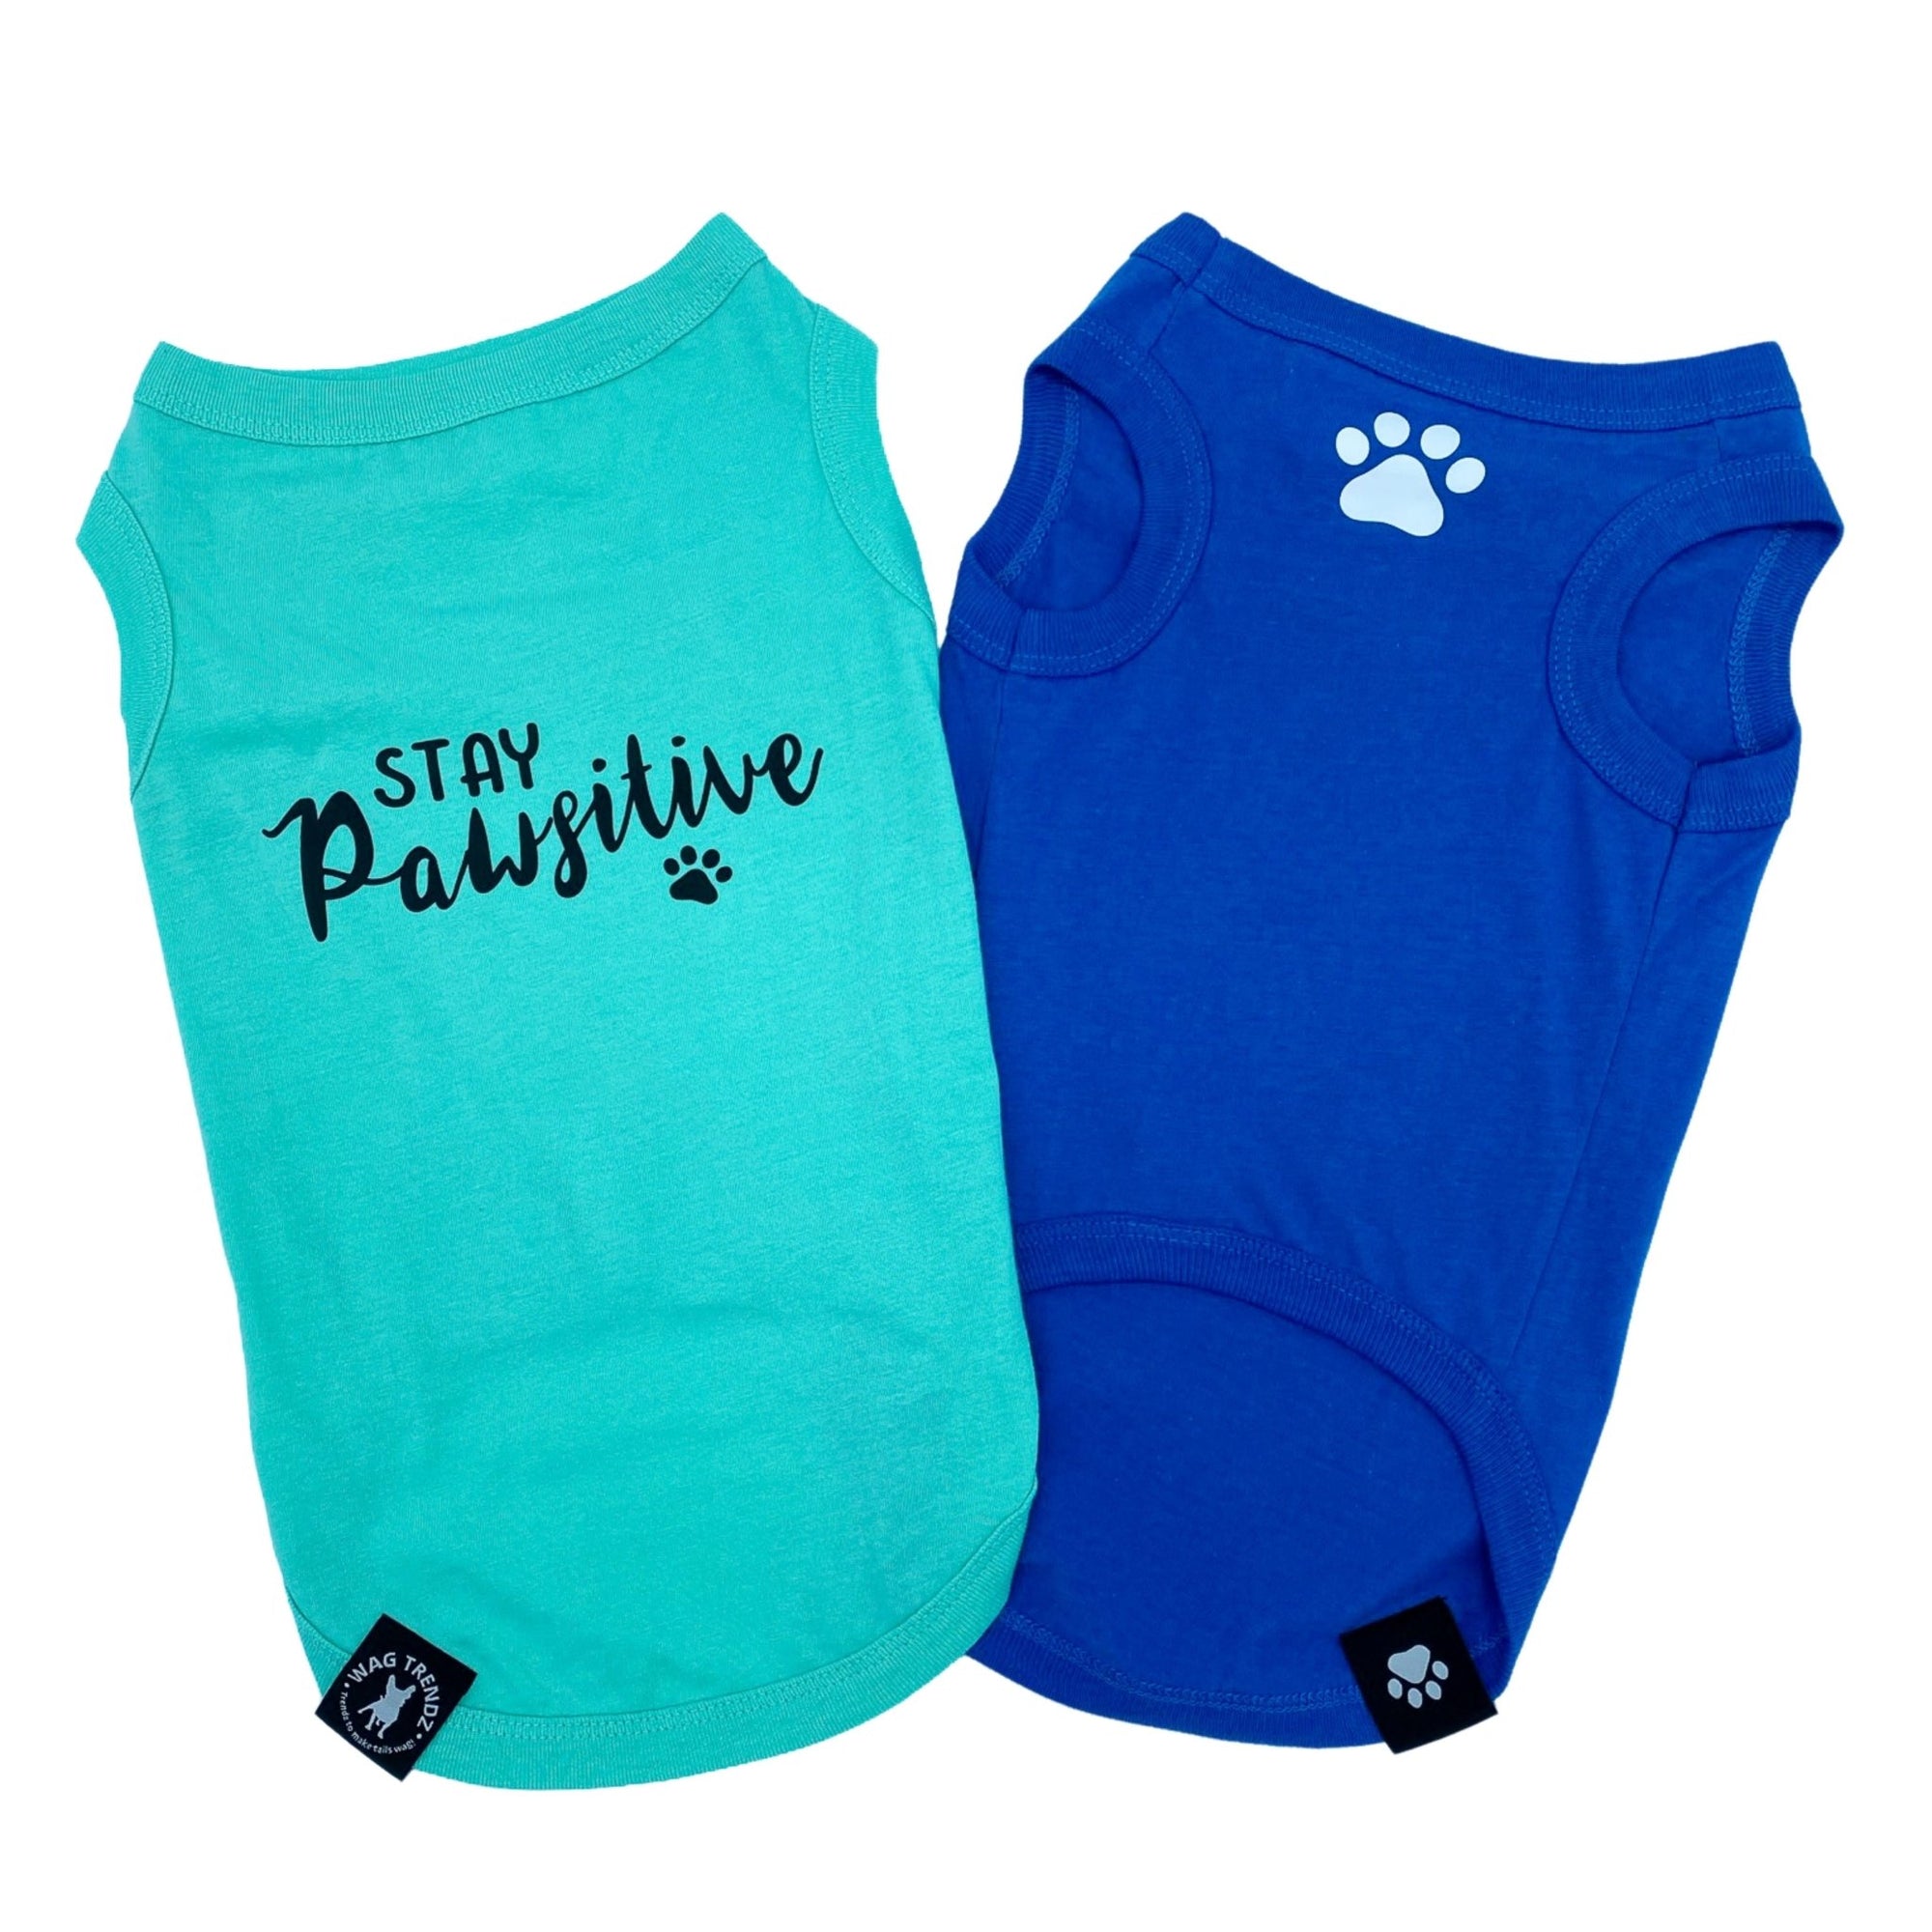 Dog T-Shirt - &quot;Stay Pawsitive&quot; - Teal and Royal Blue dog t-shirt - Stay Pawsitive lettering in black on teal t-shirt and a paw print emoji in white on chest of blue t-shirt - against solid white background - Wag Trendz